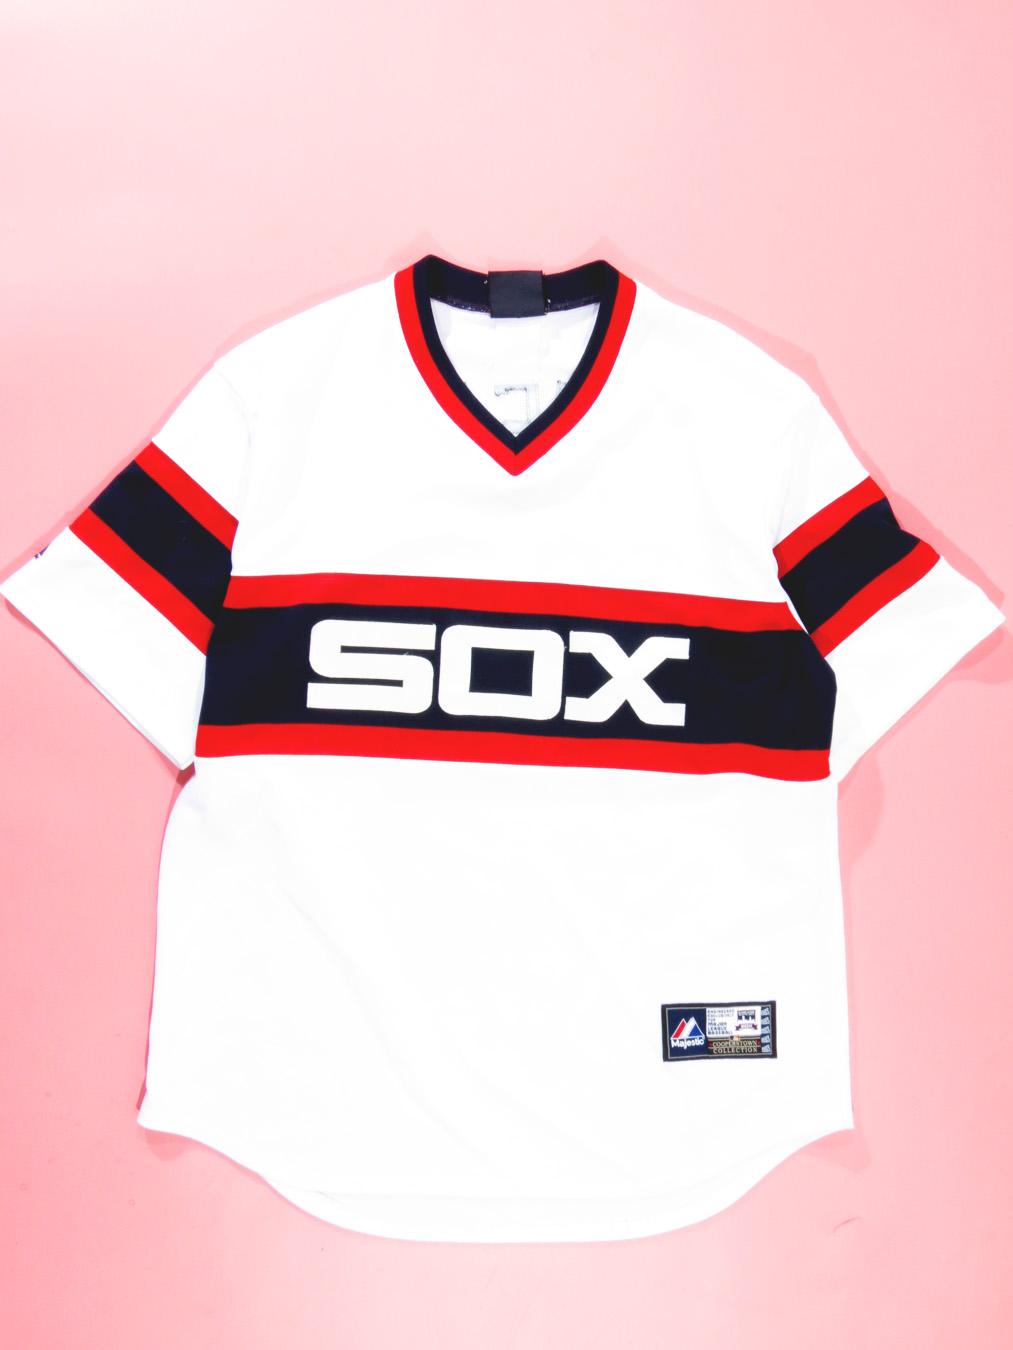 CARLTON FISK #72 WHITE SOX COOPERSTOWN MLB COLLECTION GRAY JERSEY FREE  SHIPPING